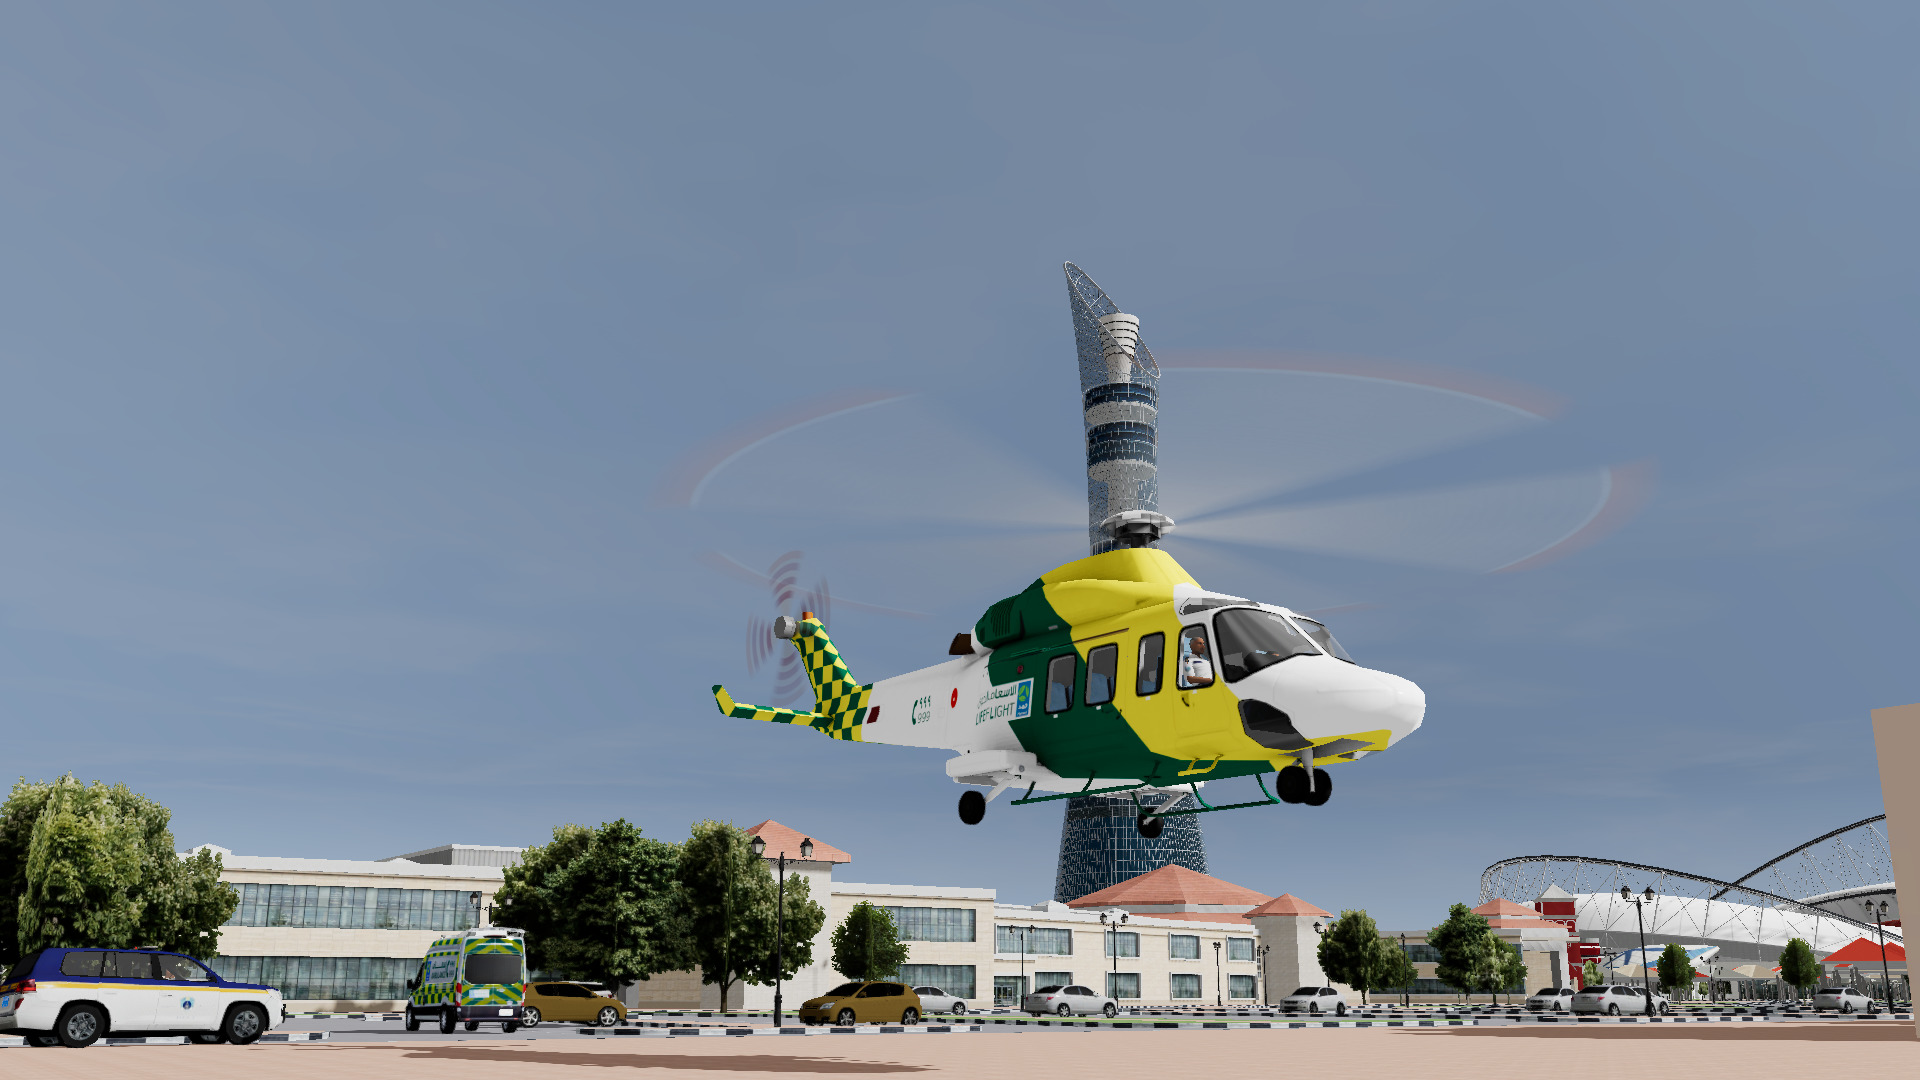 Medical Helicopter landing at the incident scene to provide urgent medical care during virtual simulation training with EMS.